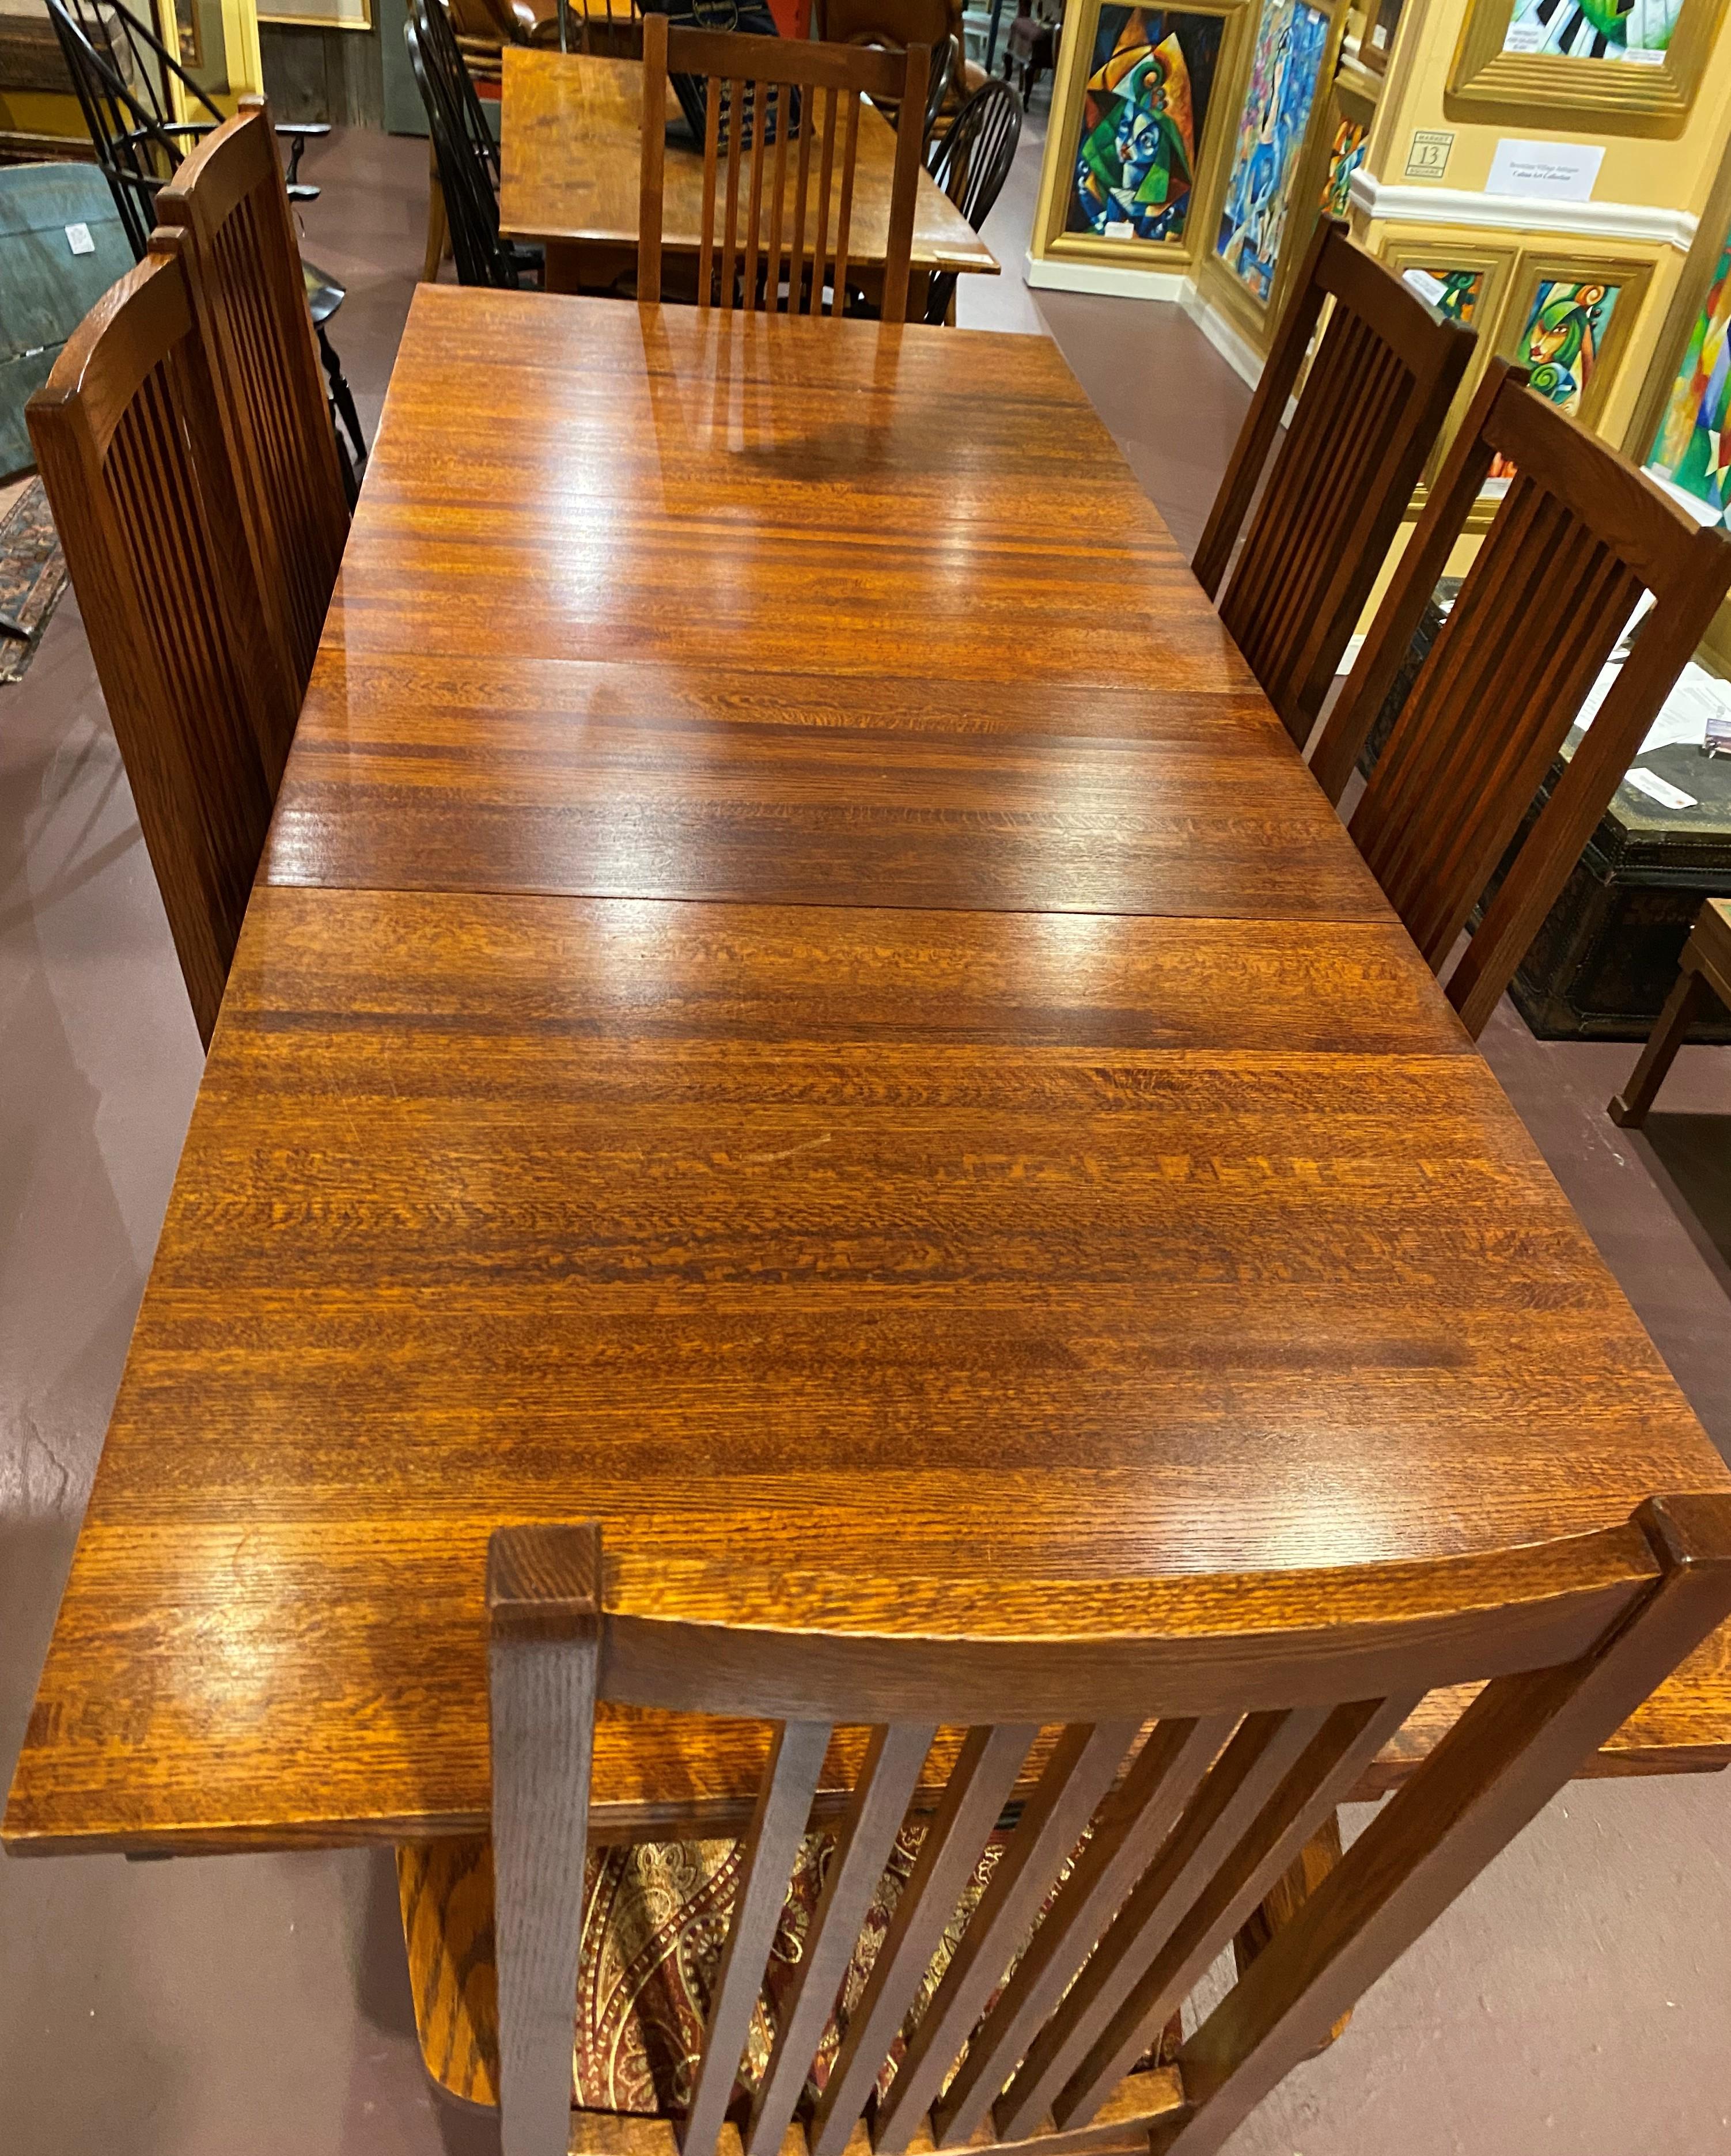 A fine mission arts and crafts style dining room set by Michaels Company of Sacramento, CA including a rectangular oak dining table with two 18 inch finished leaves with aprons and six matching tall back dining chairs (two arm chairs and six side